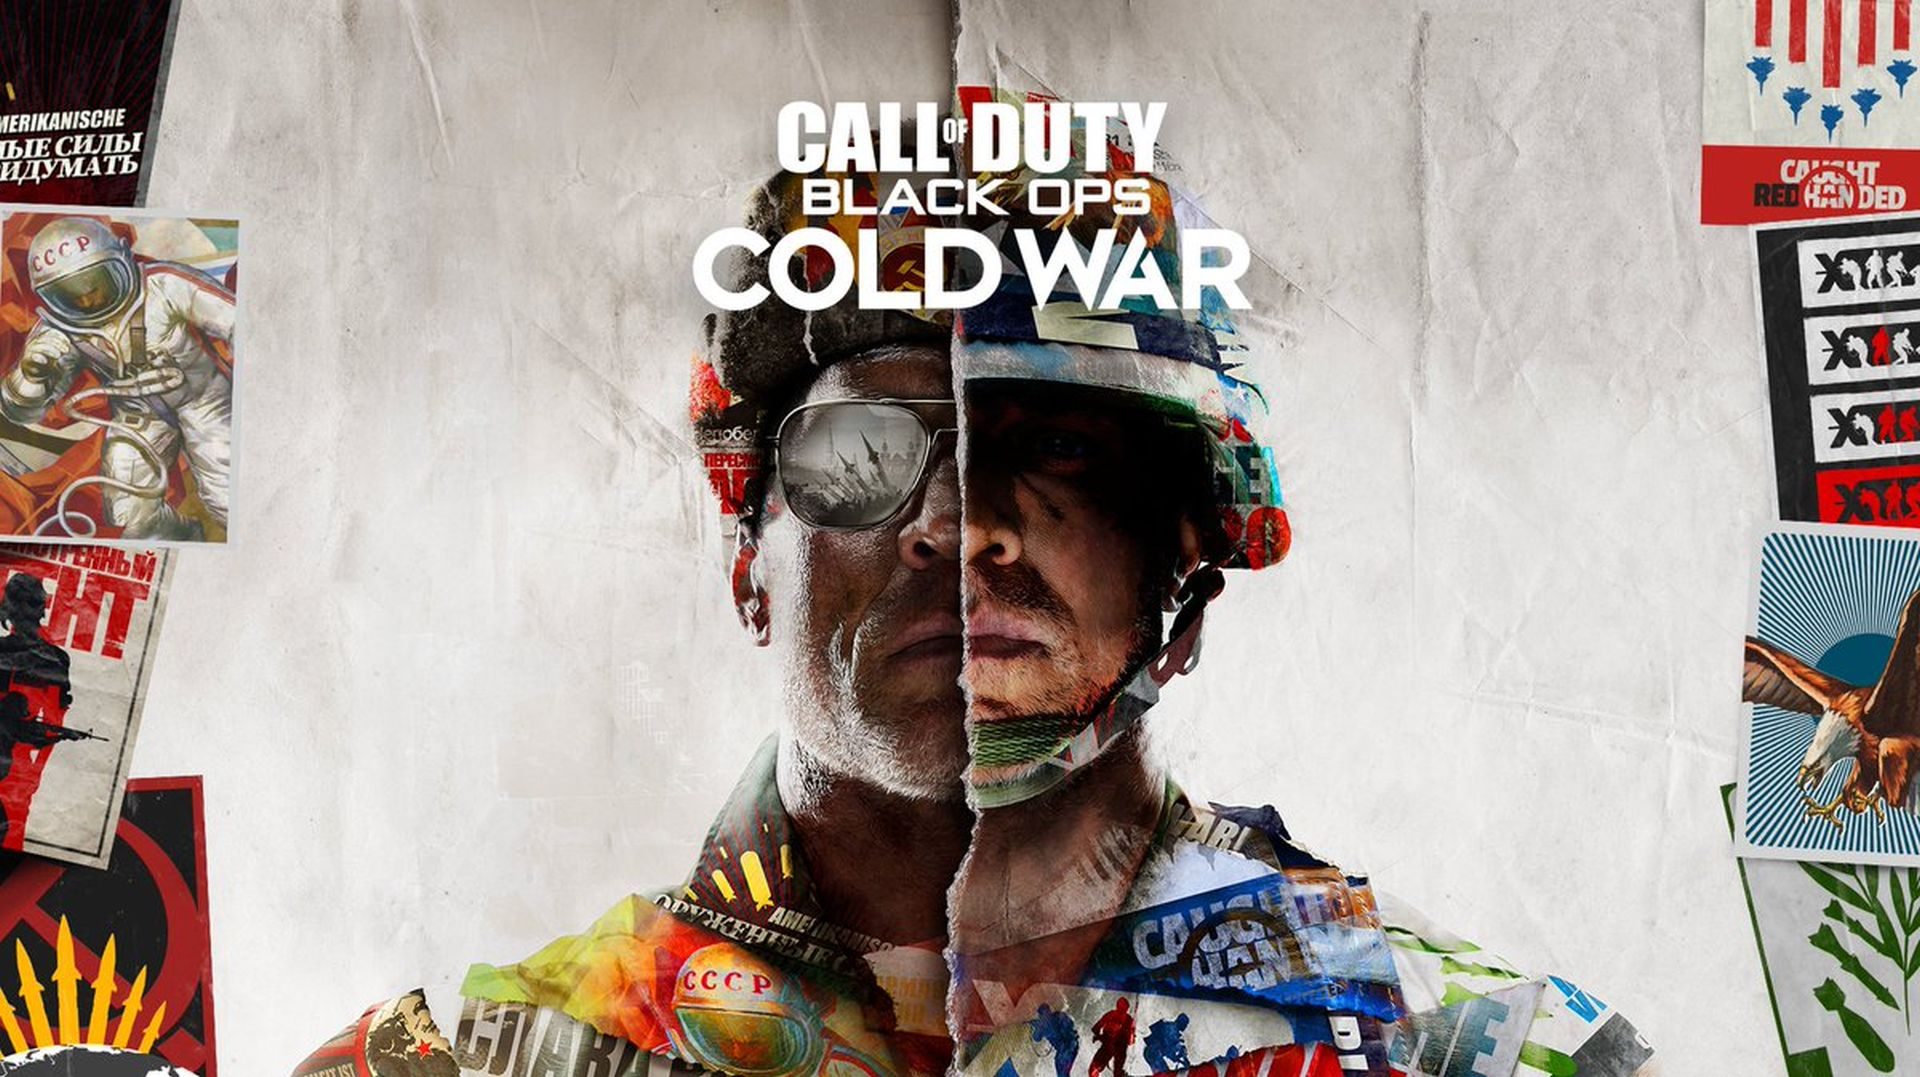 Call of-duty-black-ops-cold-war_01-6402563